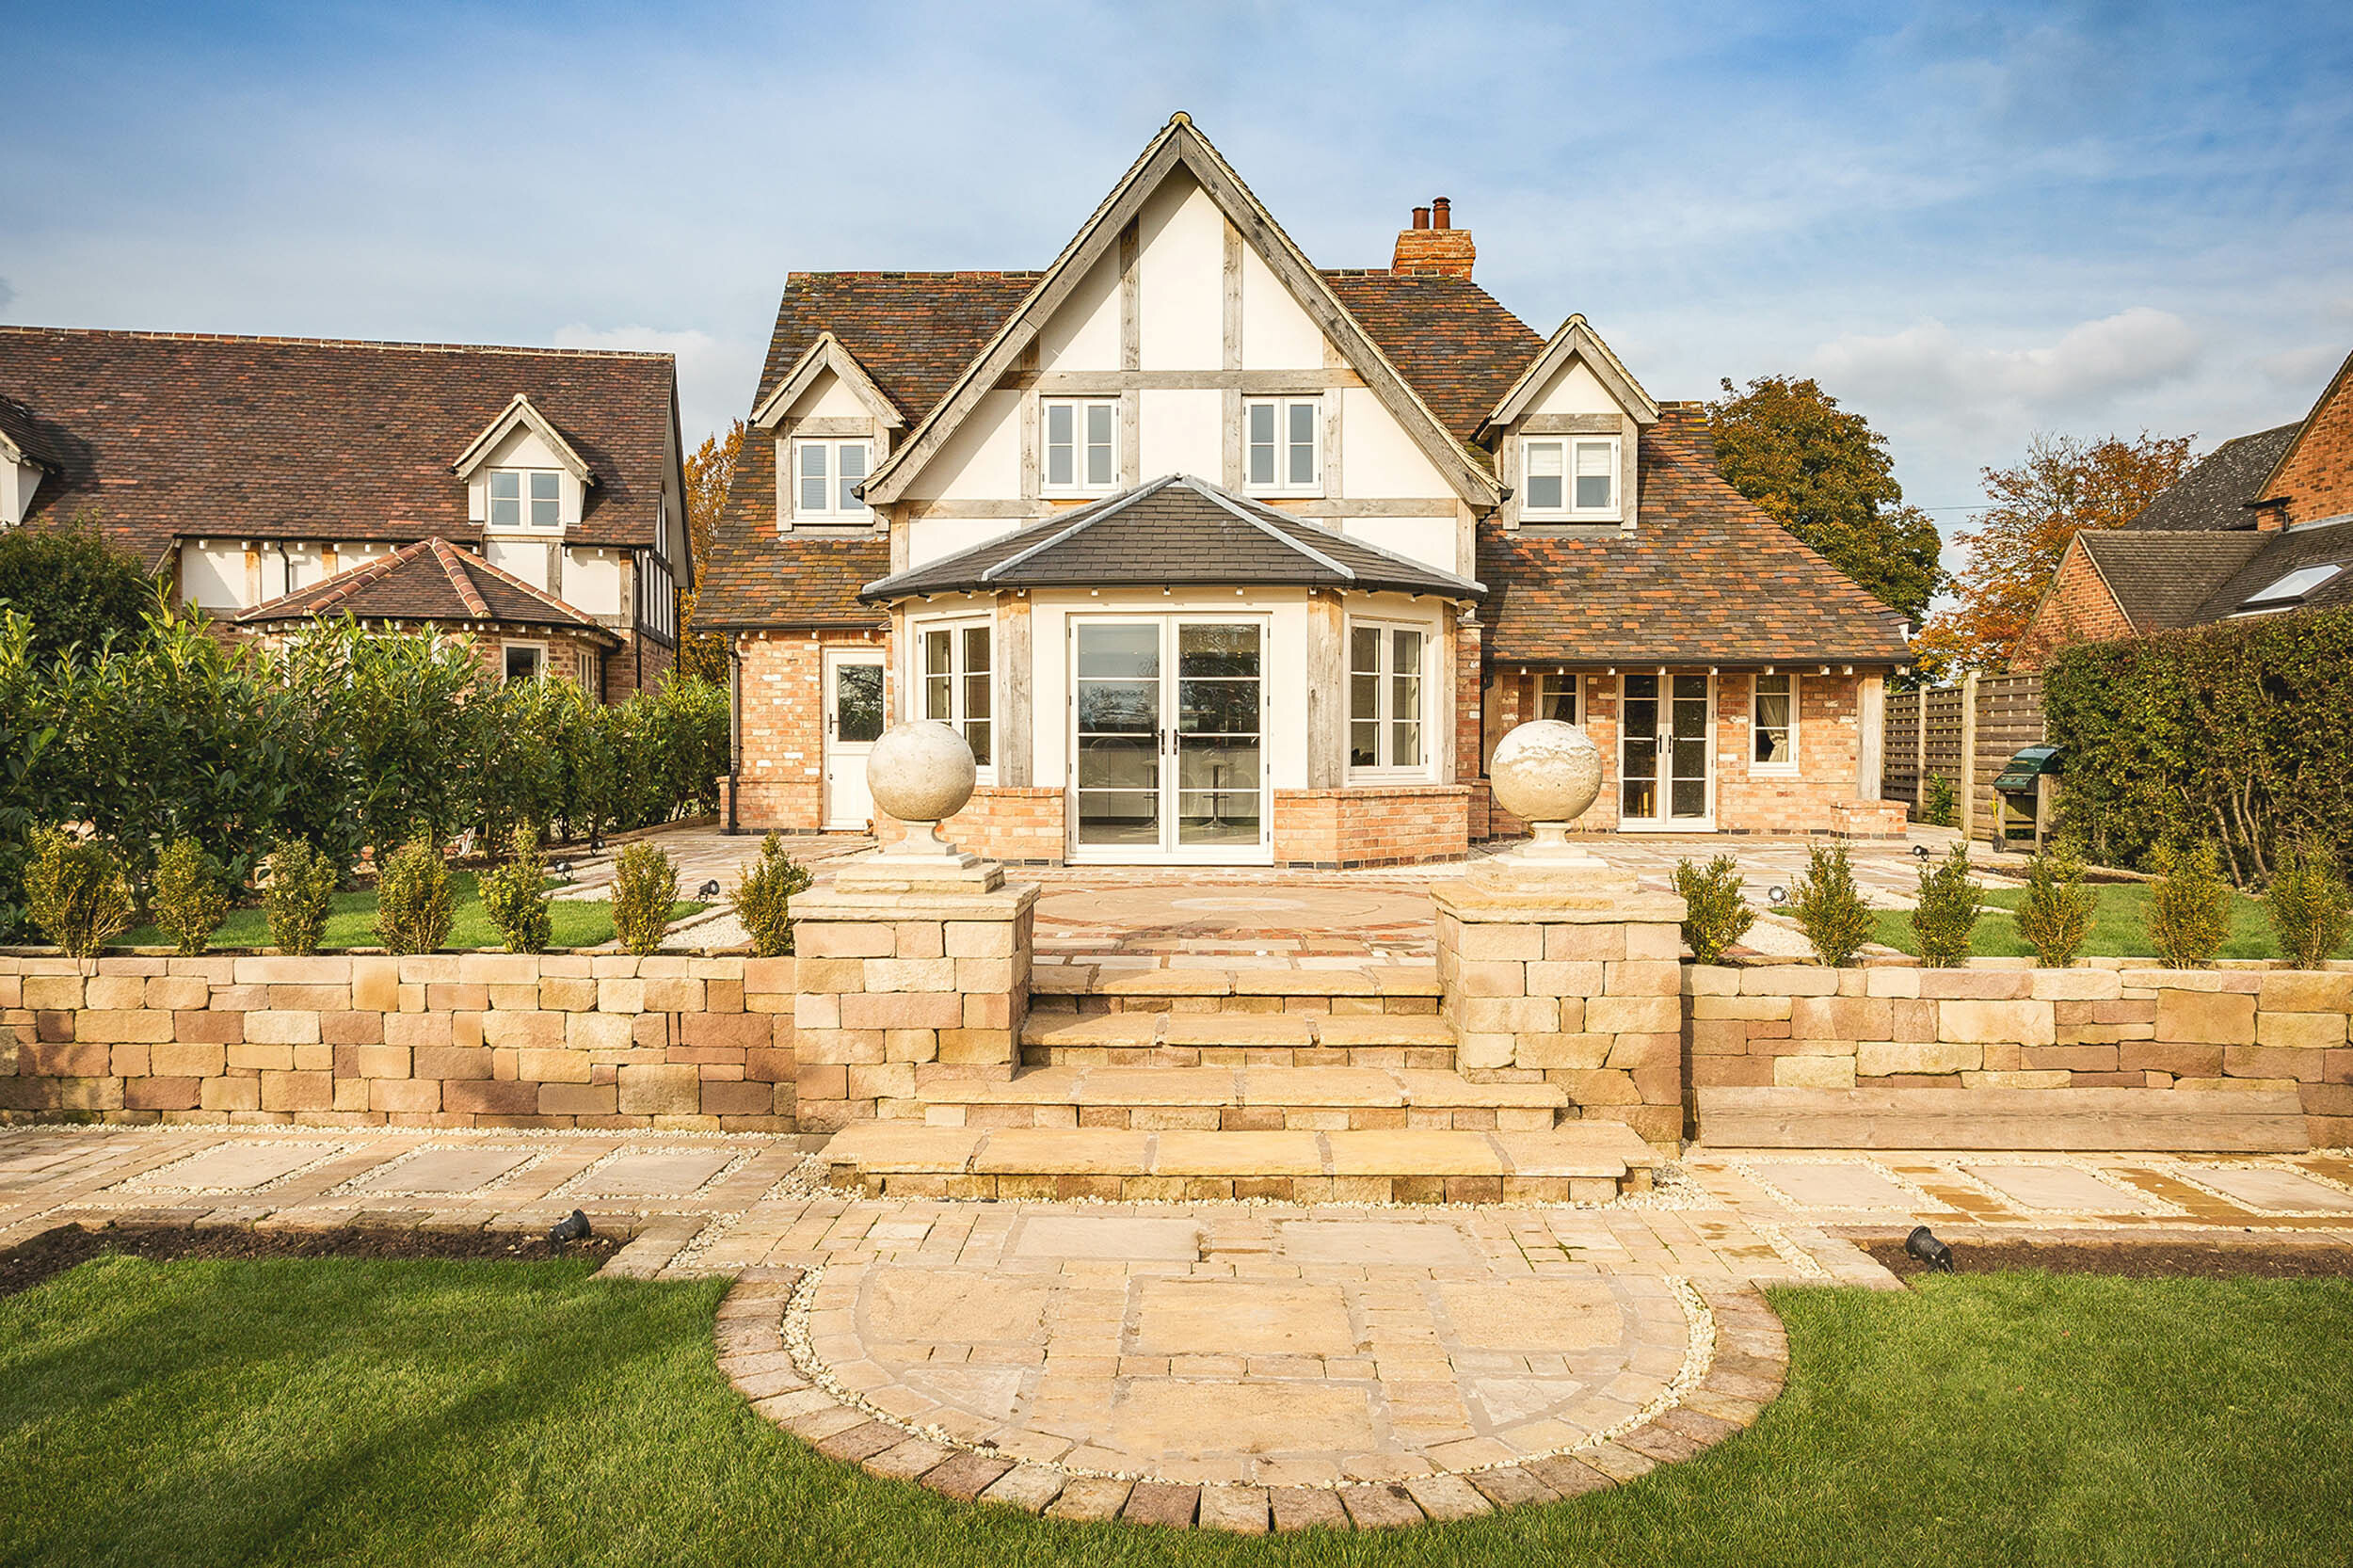 Kybird Self Build Nominated for Best Timber Frame Home at the Build It Awards 2022